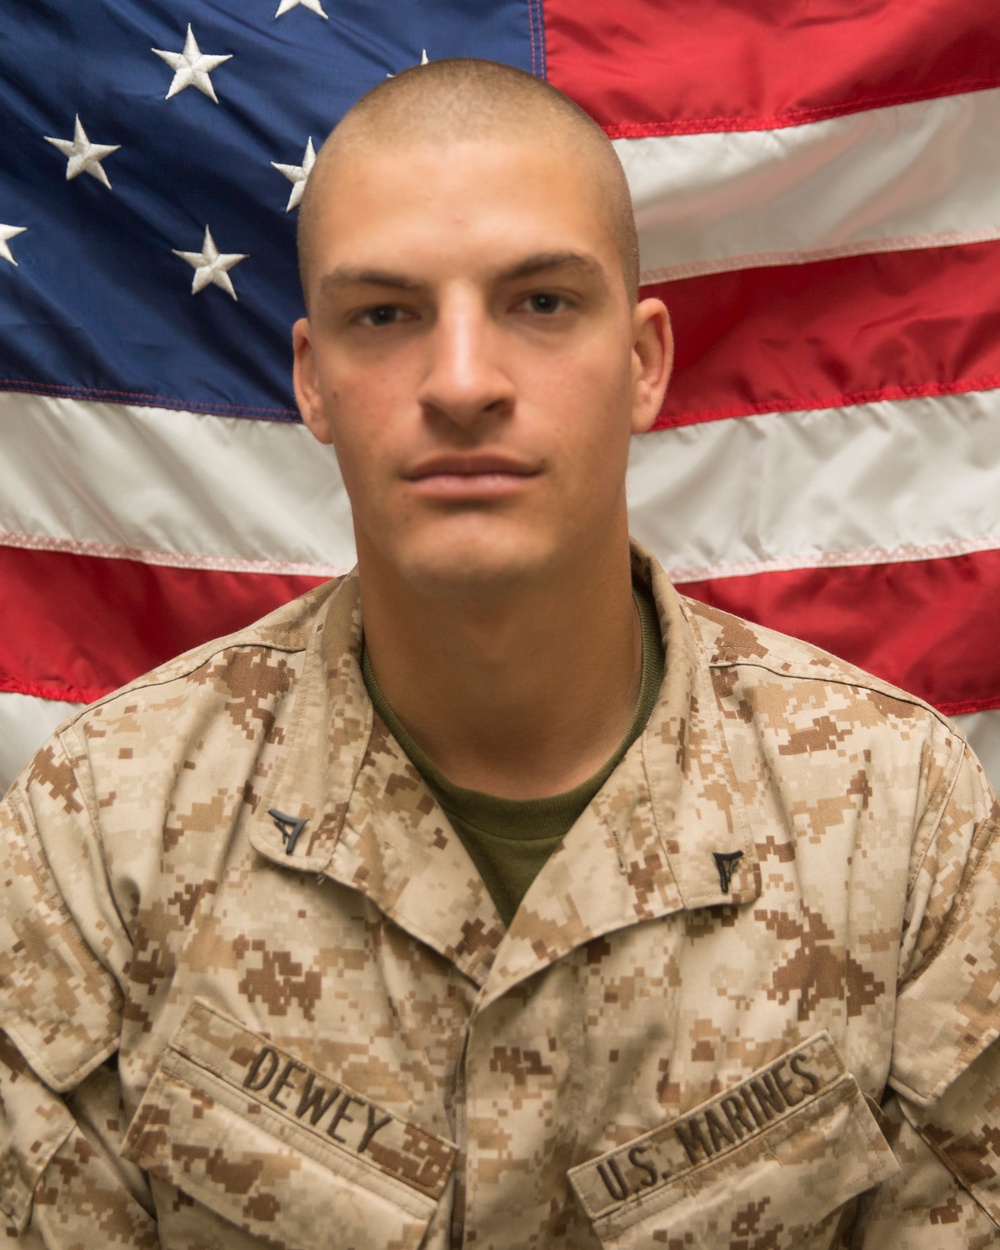 West Virginia native serving with 24th MEU